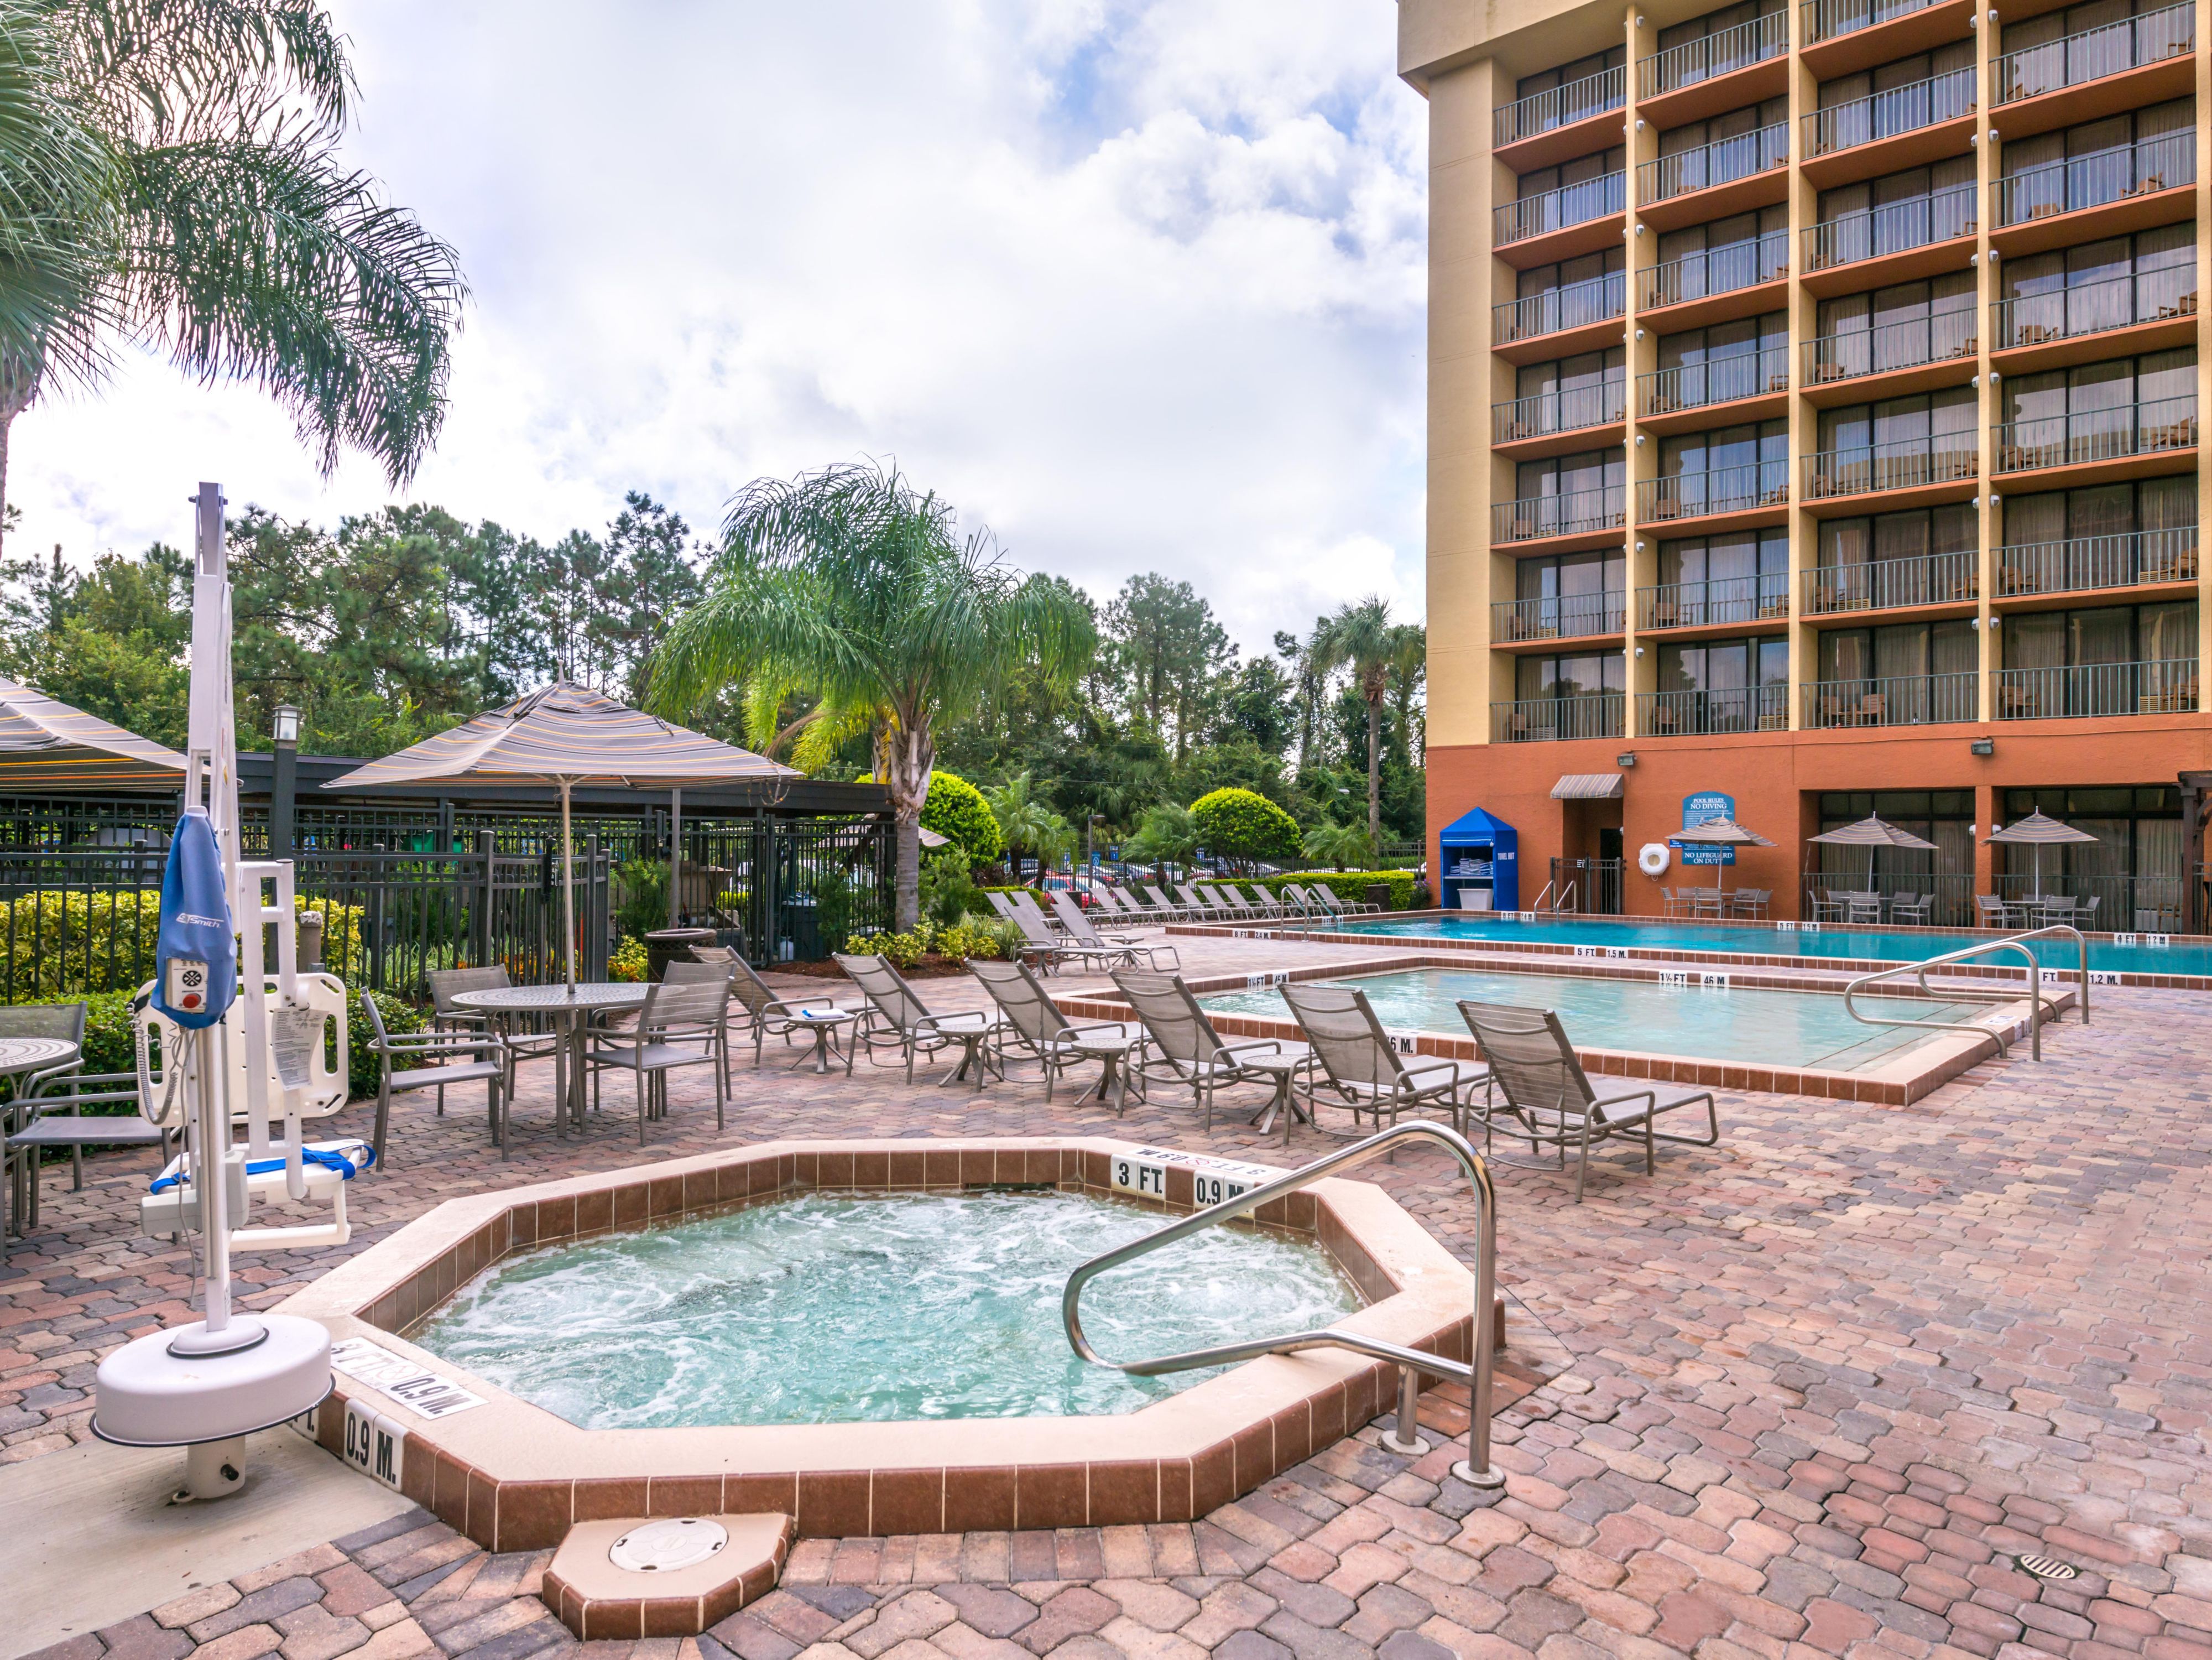 Take a dip in our oversized outdoor pool or splash around in our children’s swimming pool. Take a relaxing break from the Disney World® theme parks and lounge poolside. Soak up the Florida sunshine as you sip a cocktail or enjoy light bites from Chianti’s Lounge. Make memories at our family-friendly hotel in the heart of Orlando.